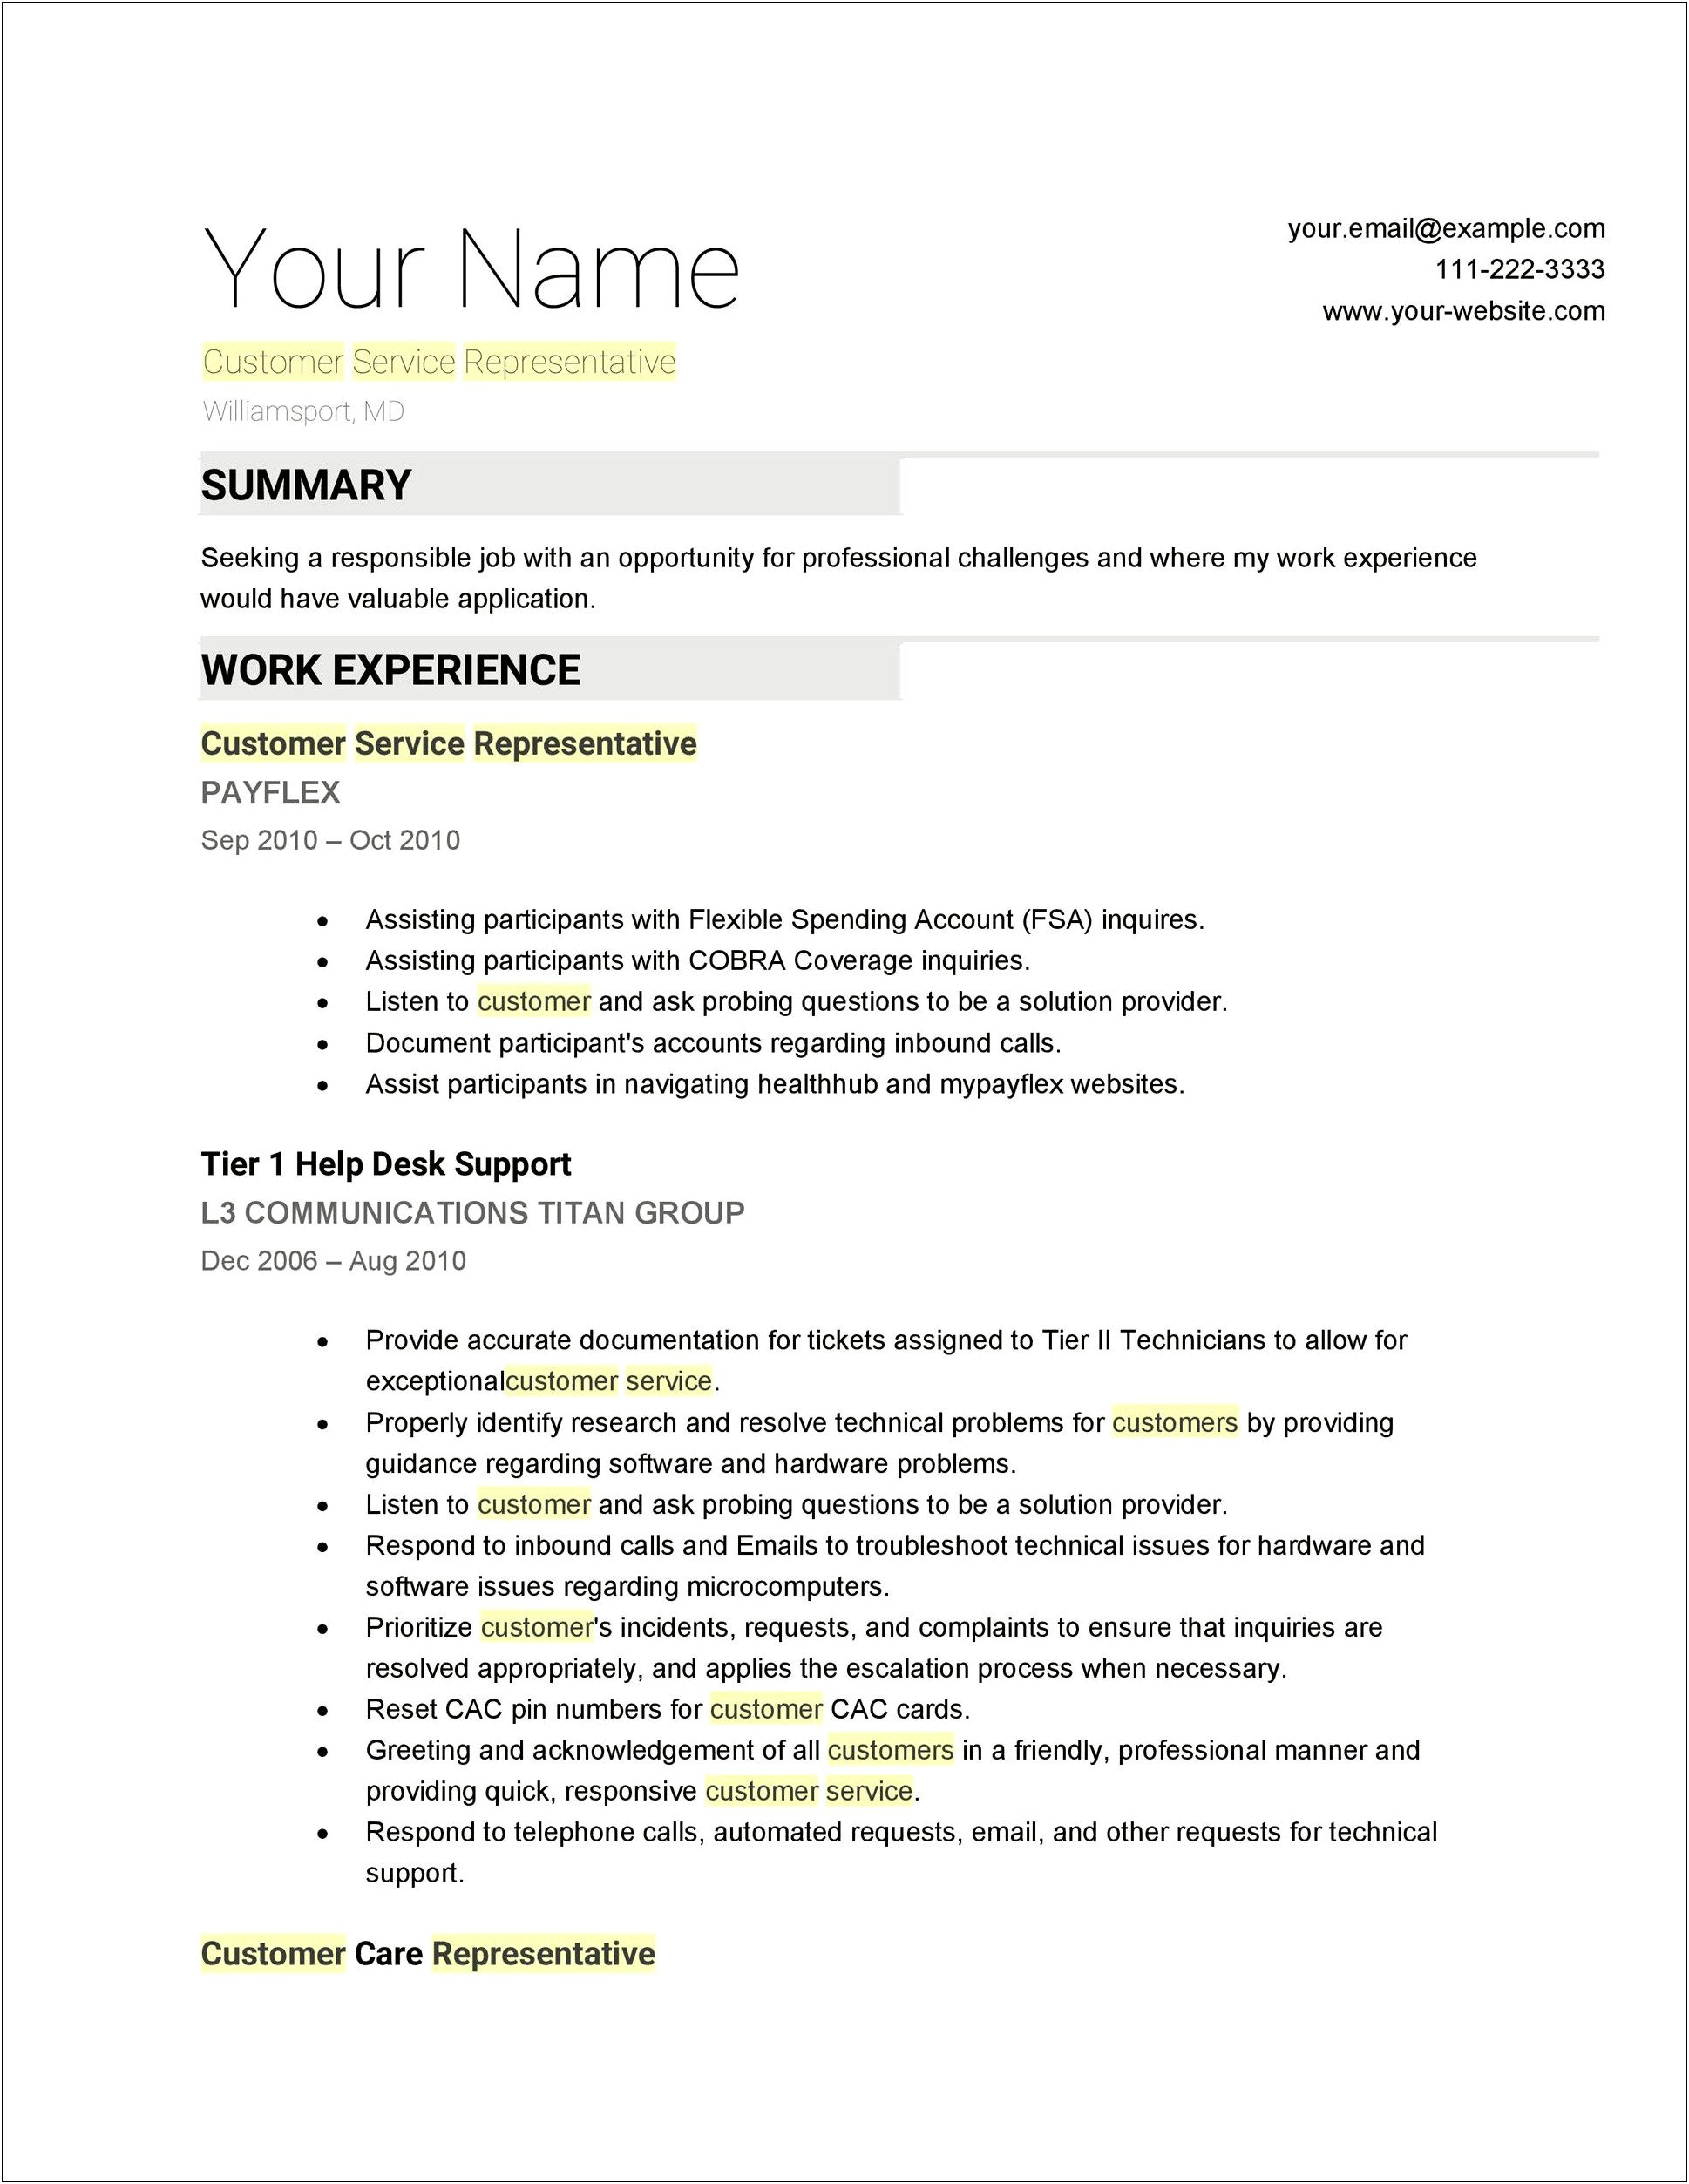 Examples Of Summaries For Resumes For Customer Service